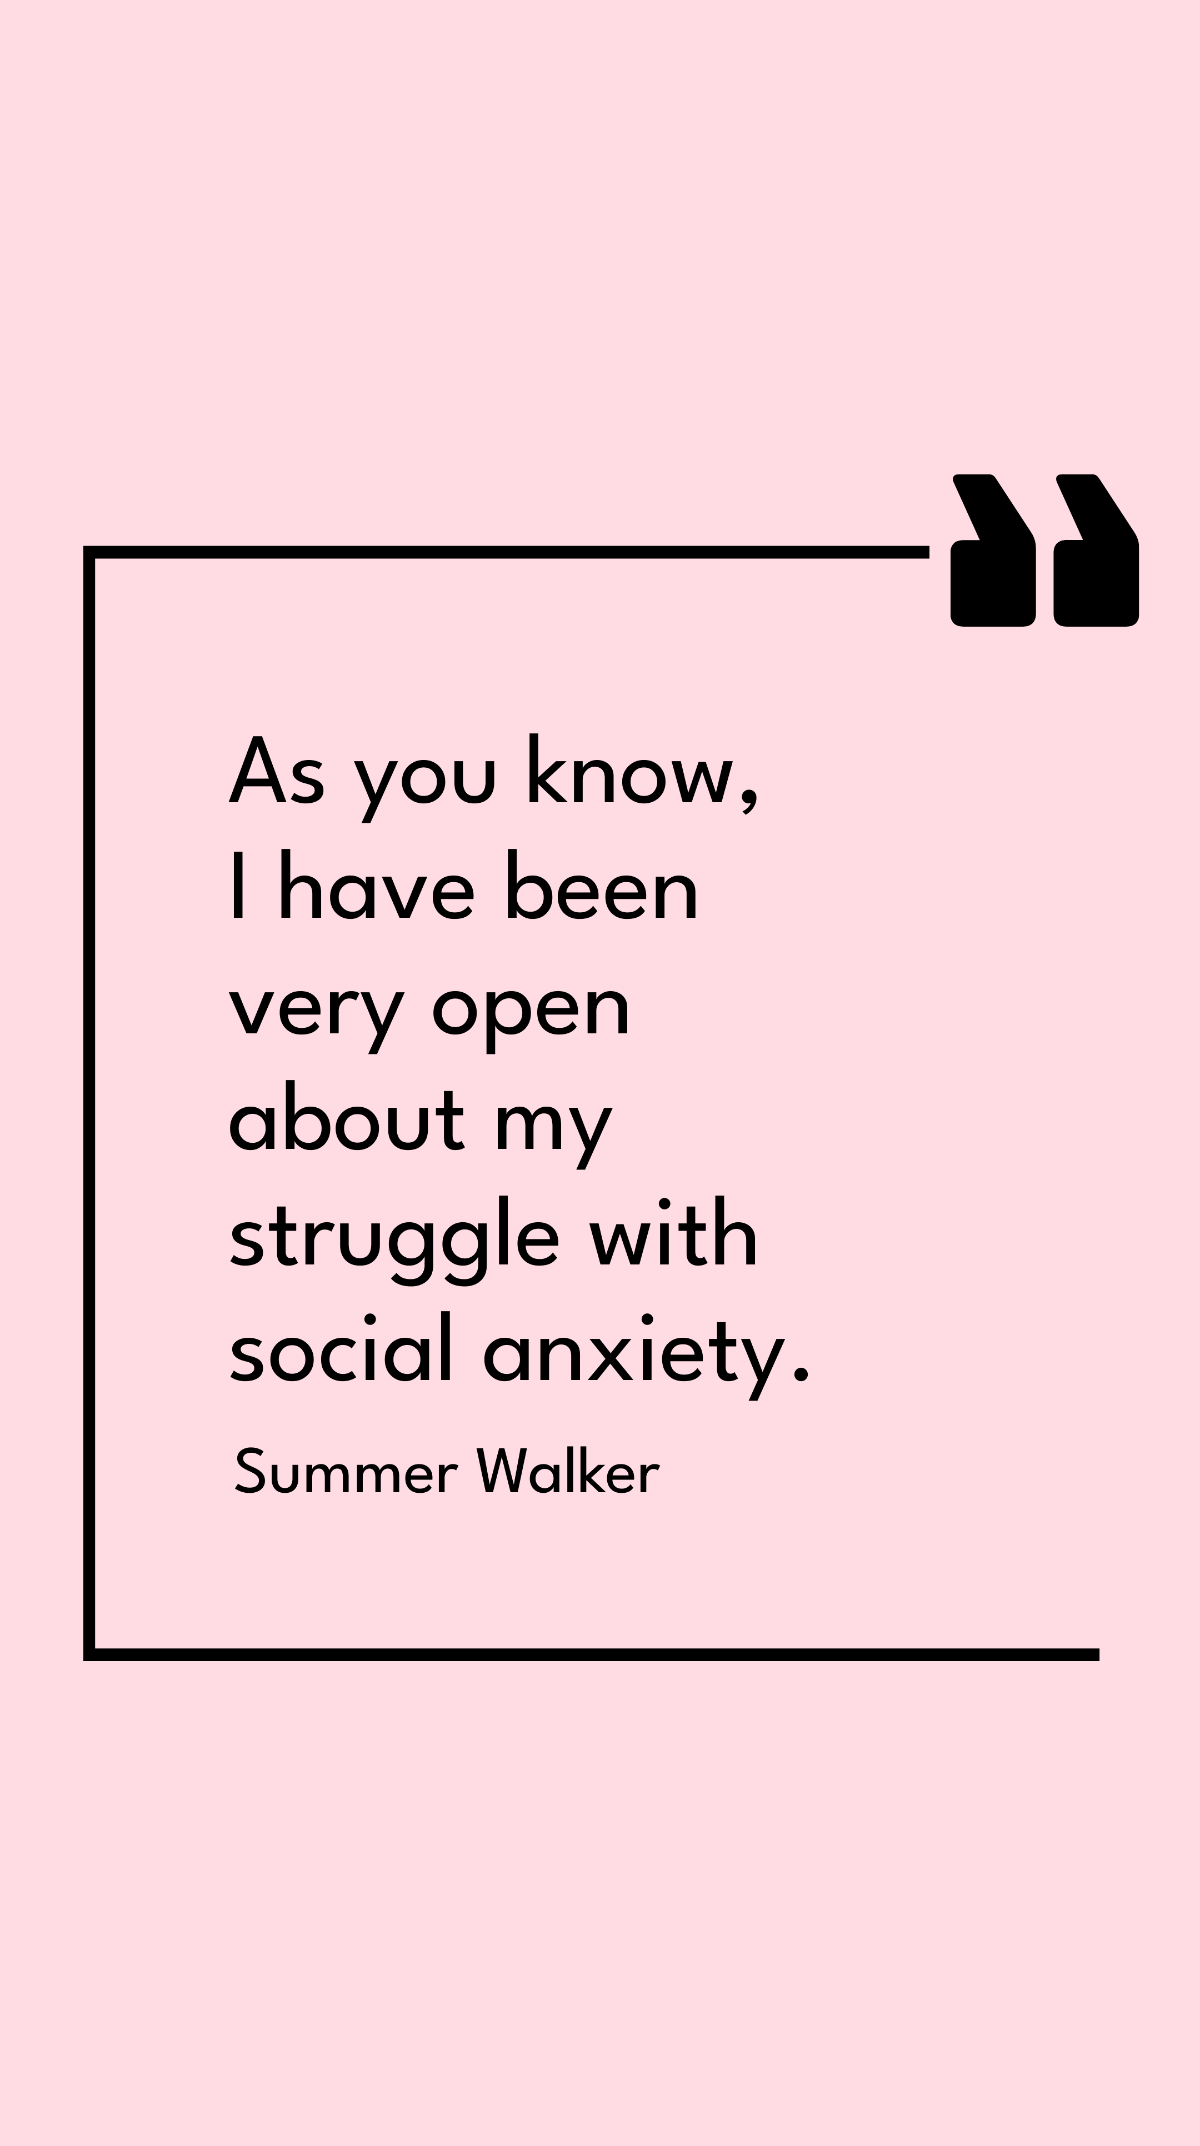 Summer Walker - As you know, I have been very open about my struggle with social anxiety. Template